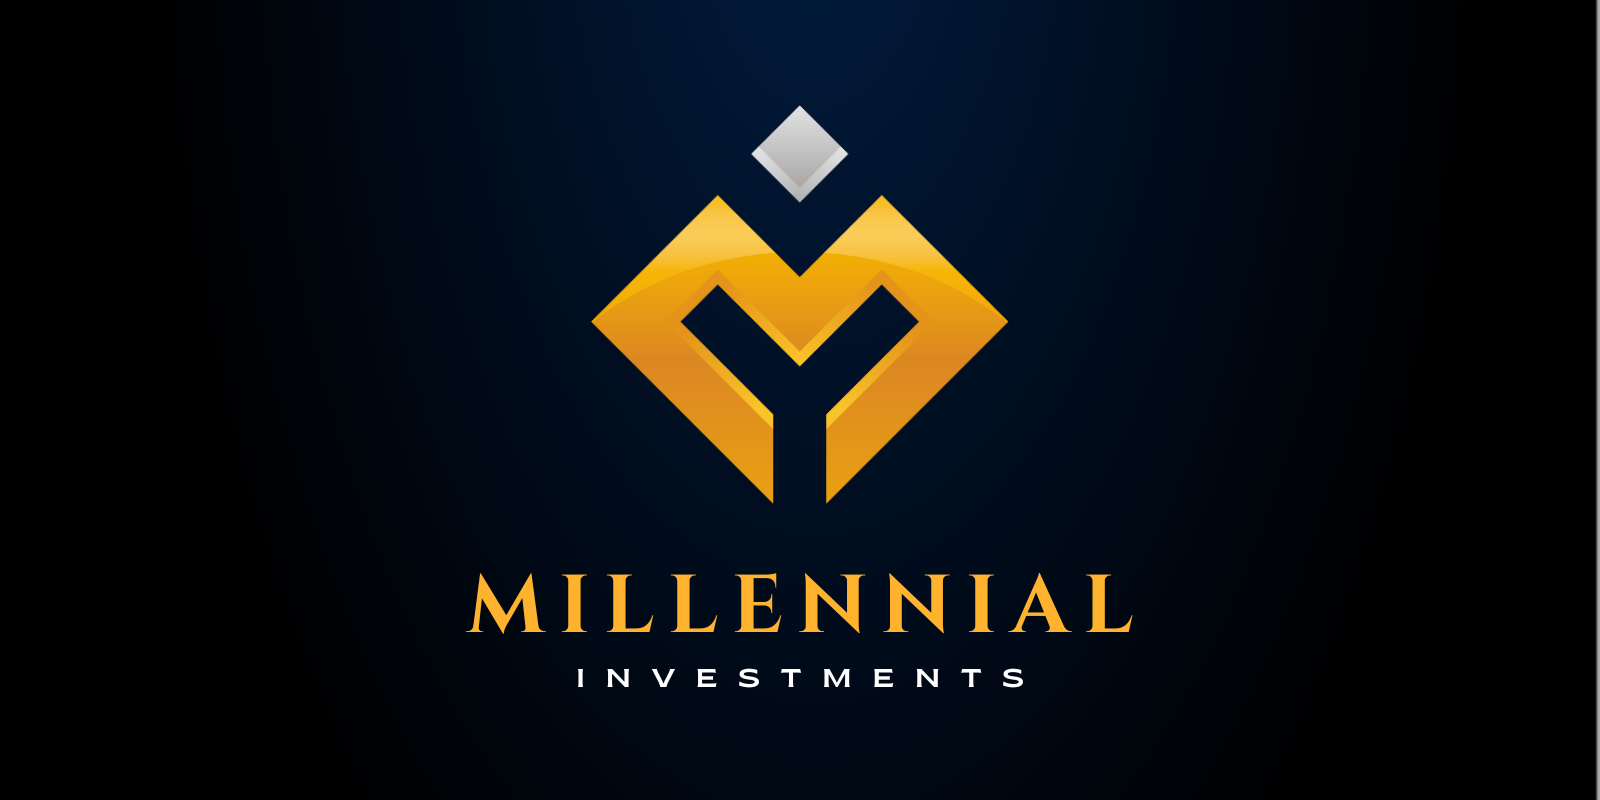 gold silver financial investment logo 1600 × 800 px 814